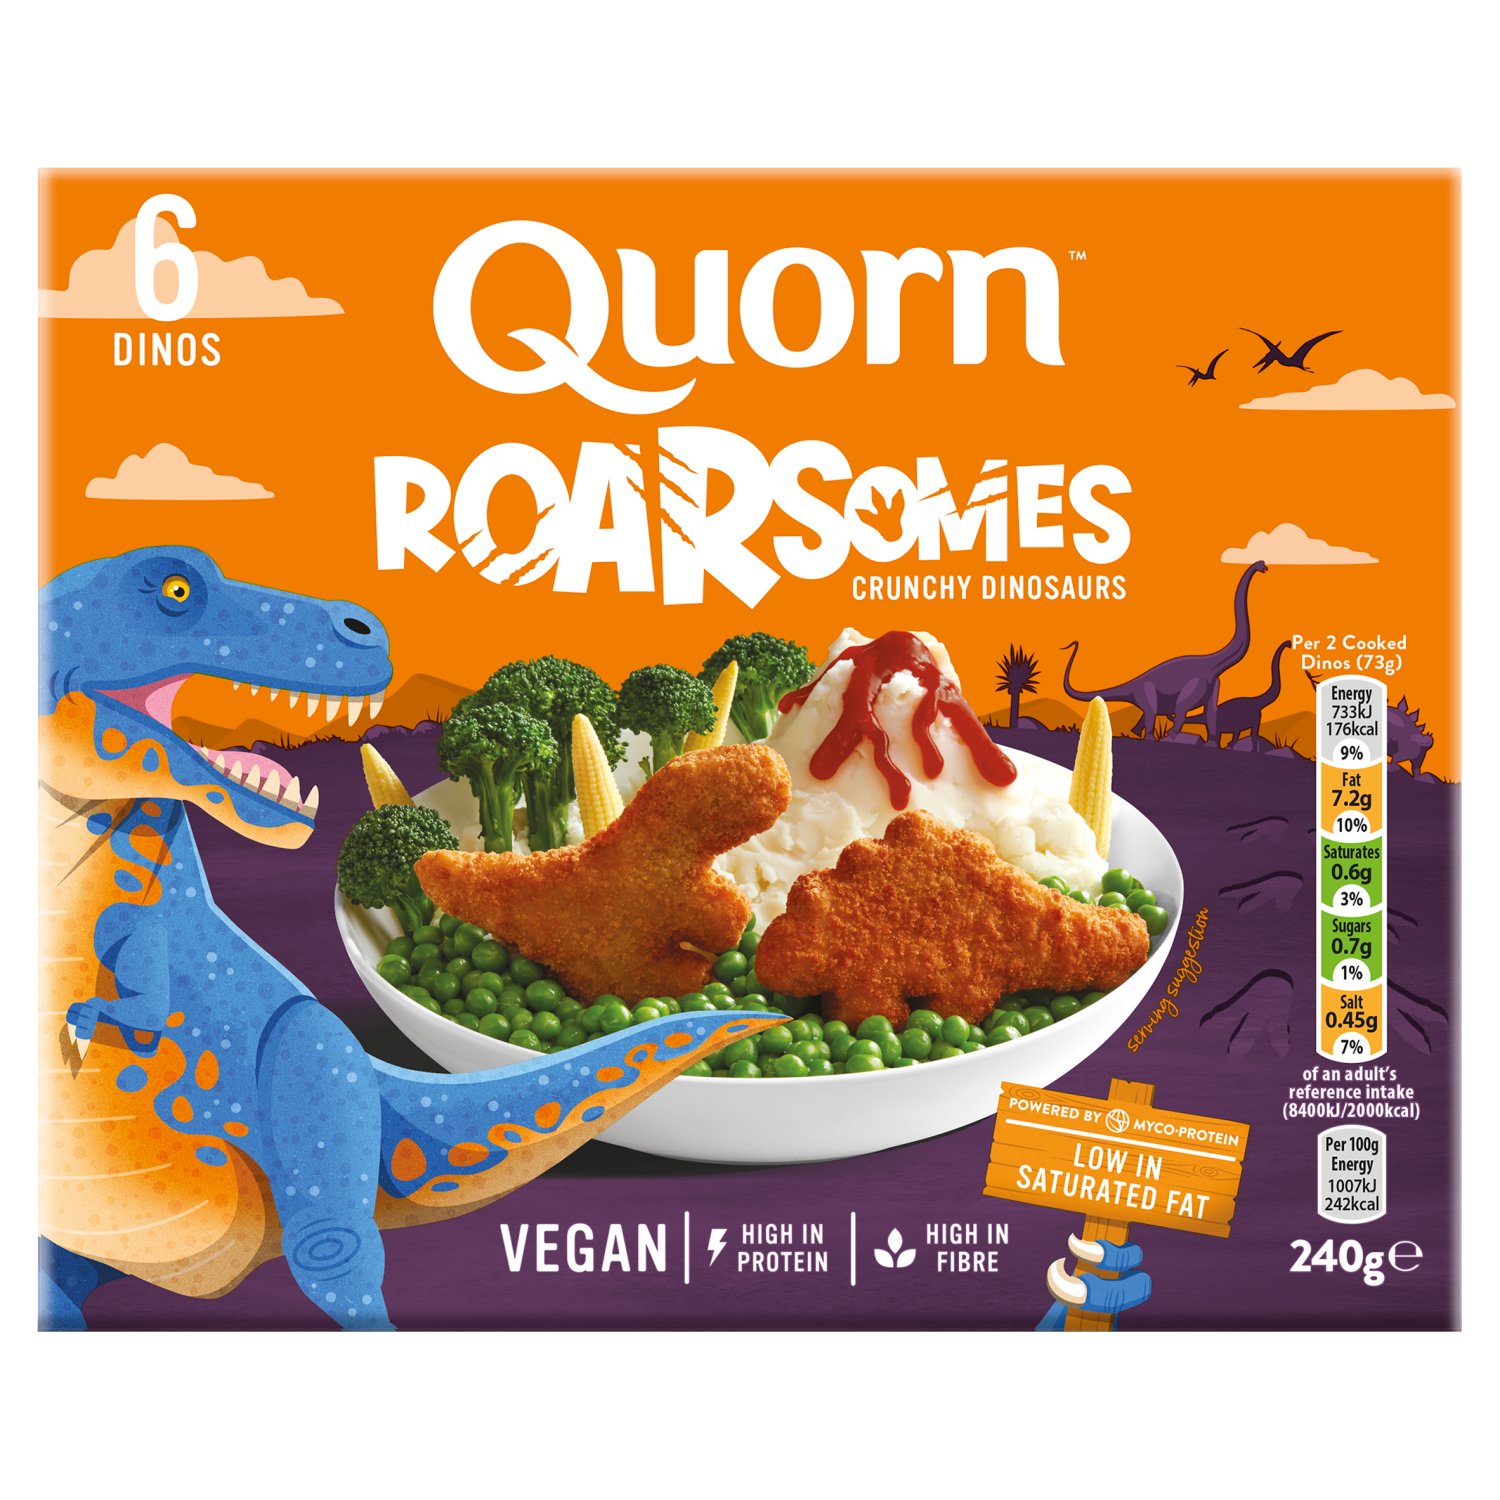 Quorn® and the Quorn™ logo are trademarks belonging to Marlow Foods Ltd.